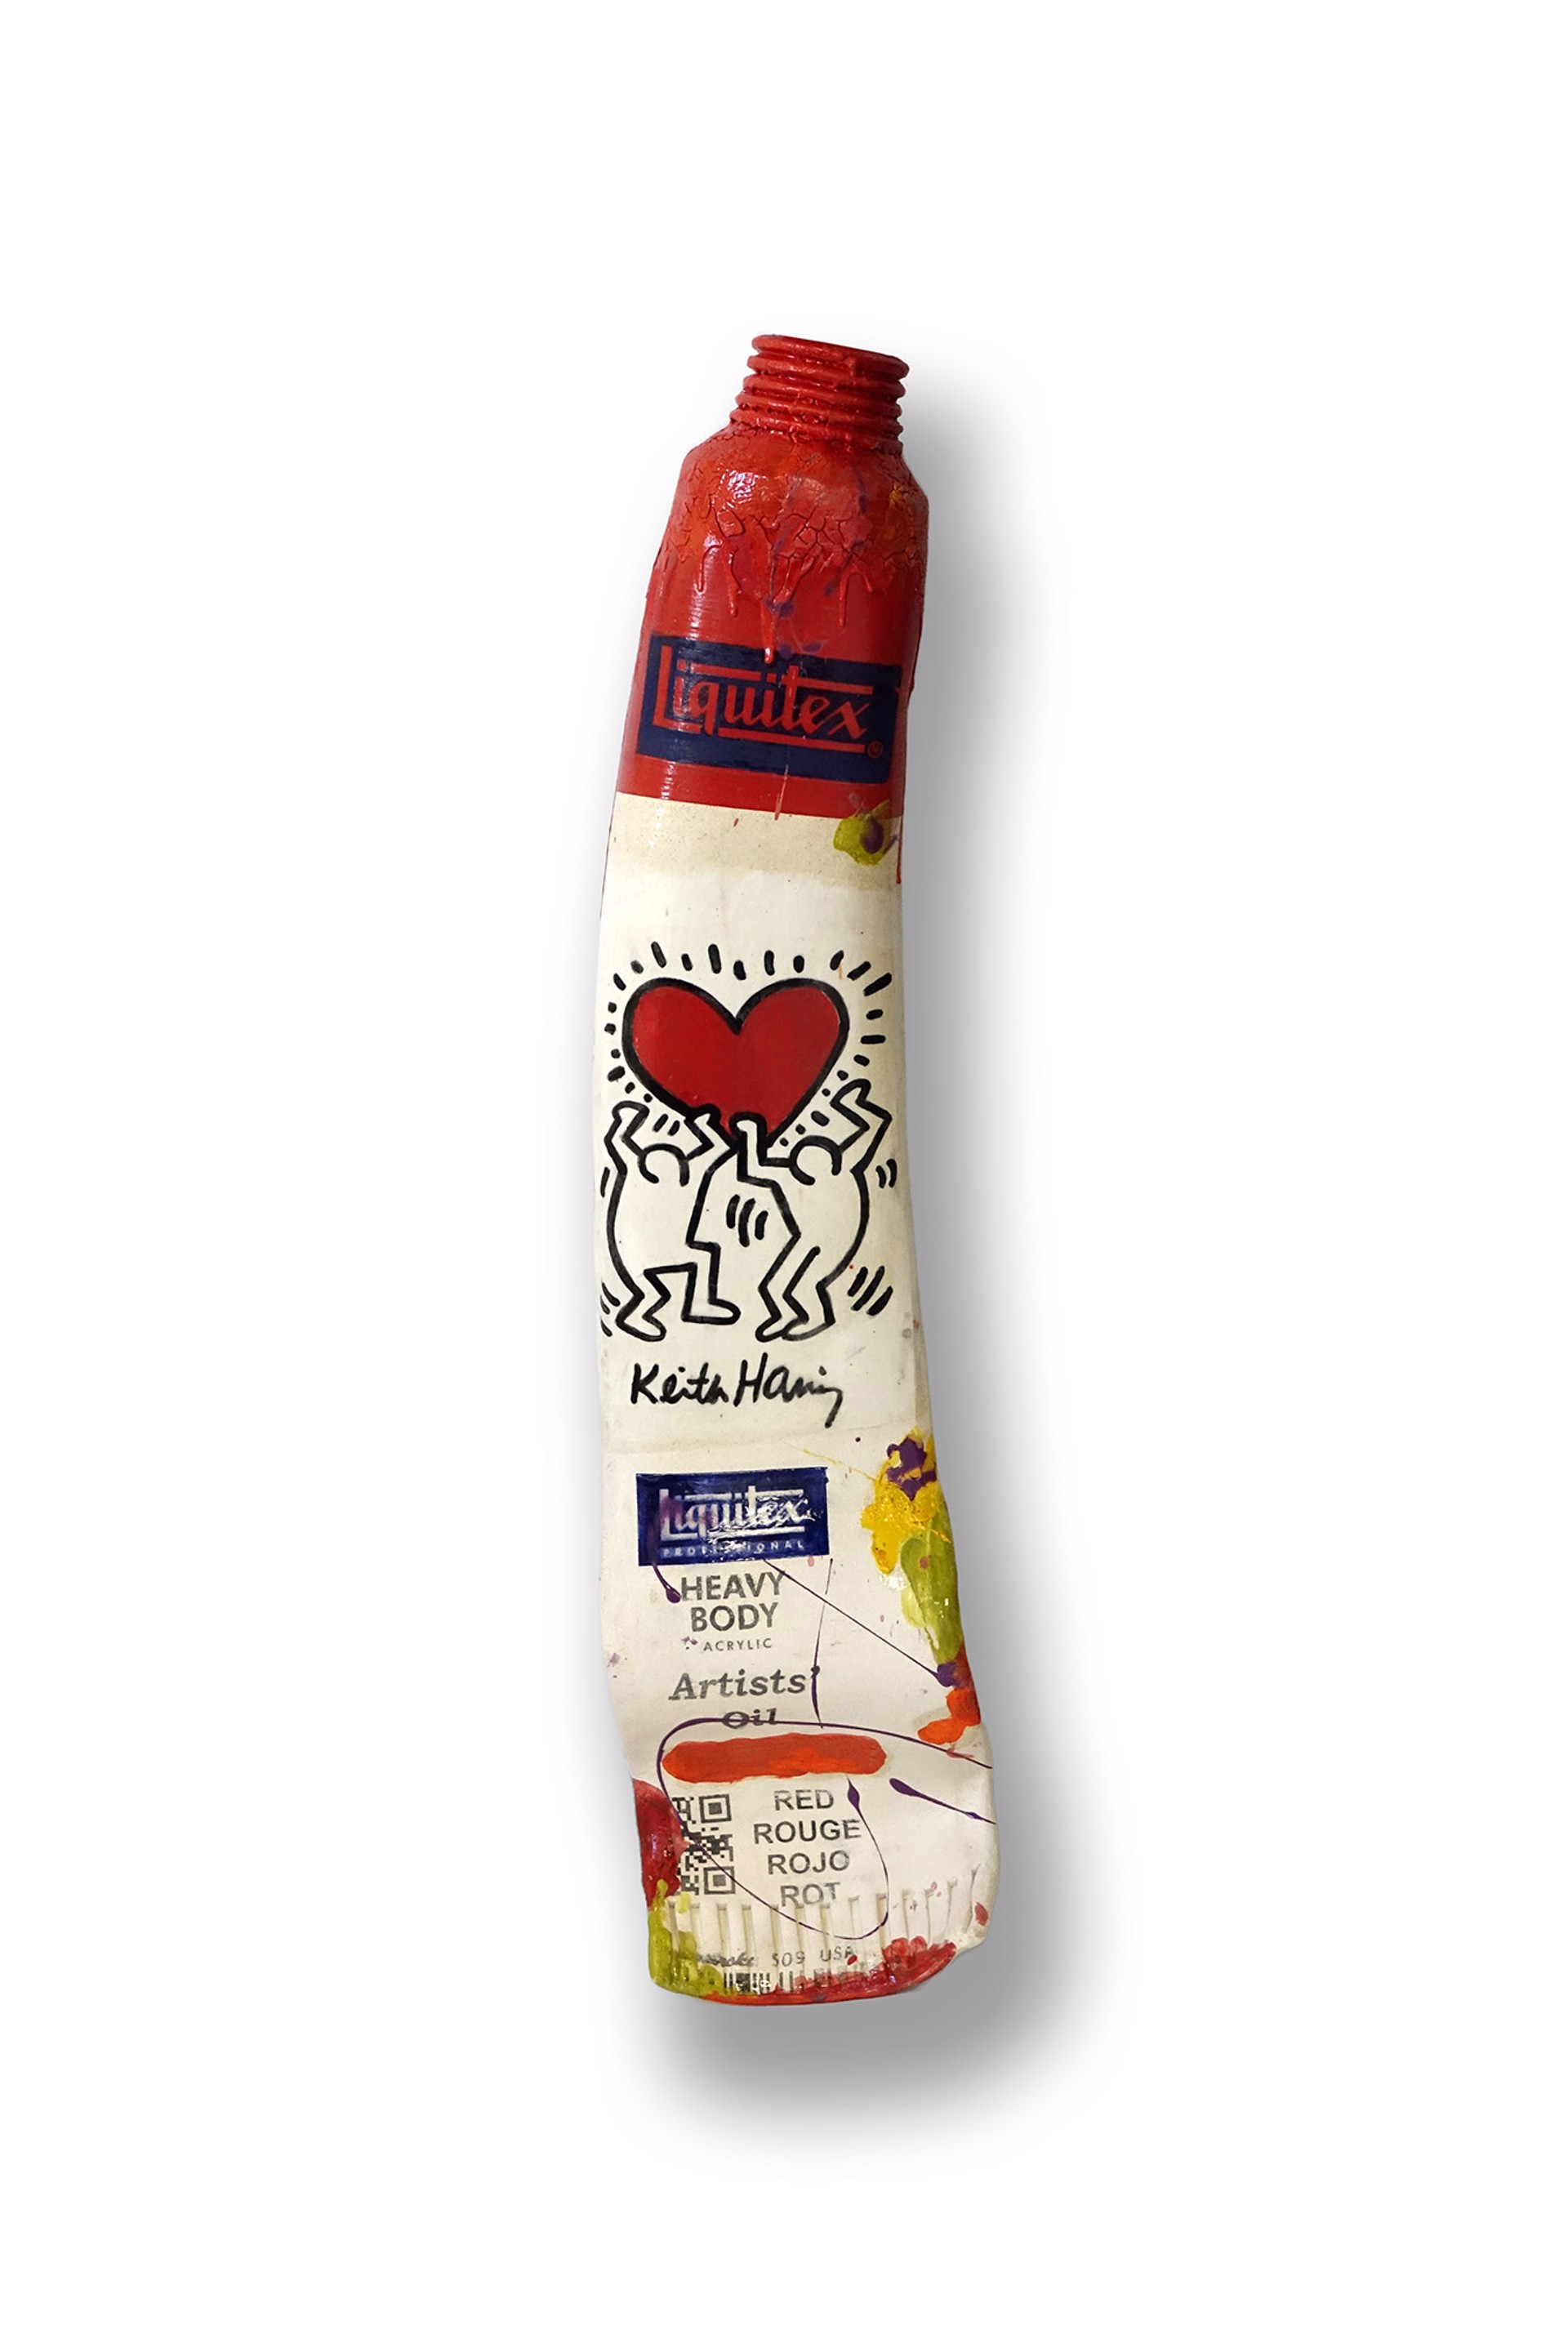 Red Keith Haring Paint Tube with Squirt III by Ray Gross